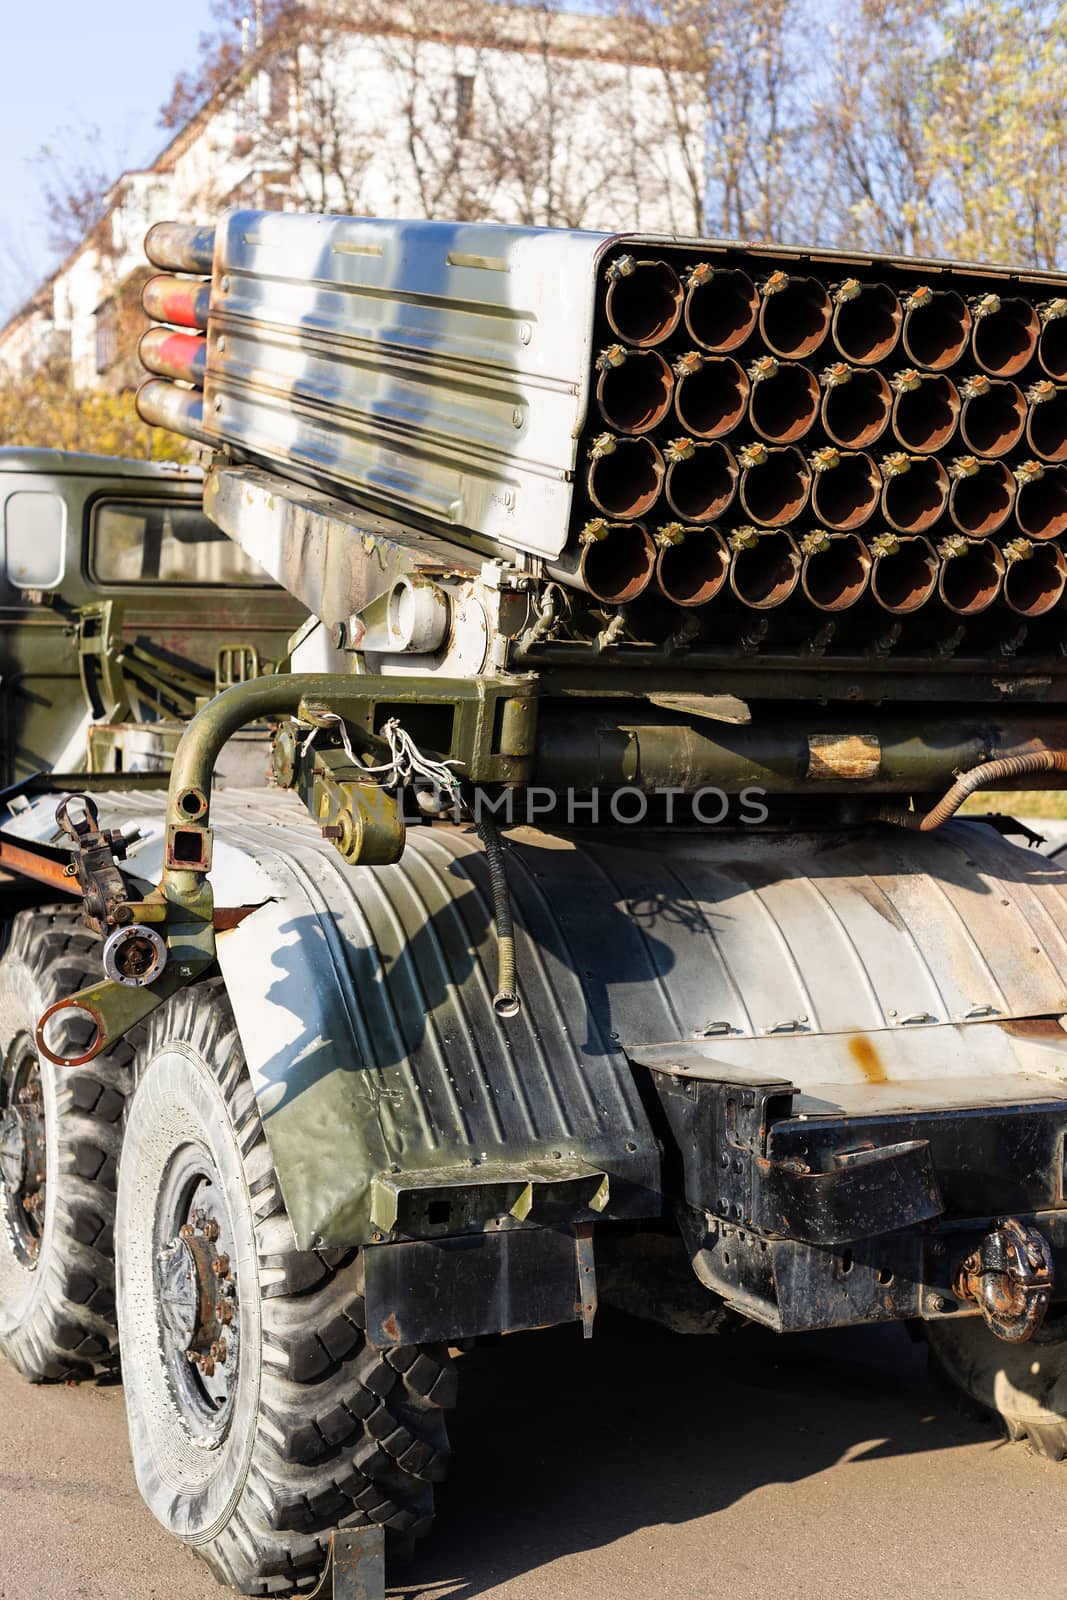 Camouflage military truck with rocket launcher. Outdoor military vehicles museum. Armor is damaged at the battlefield. Missile firing system on military armored truck close up view. Rocket launcher.